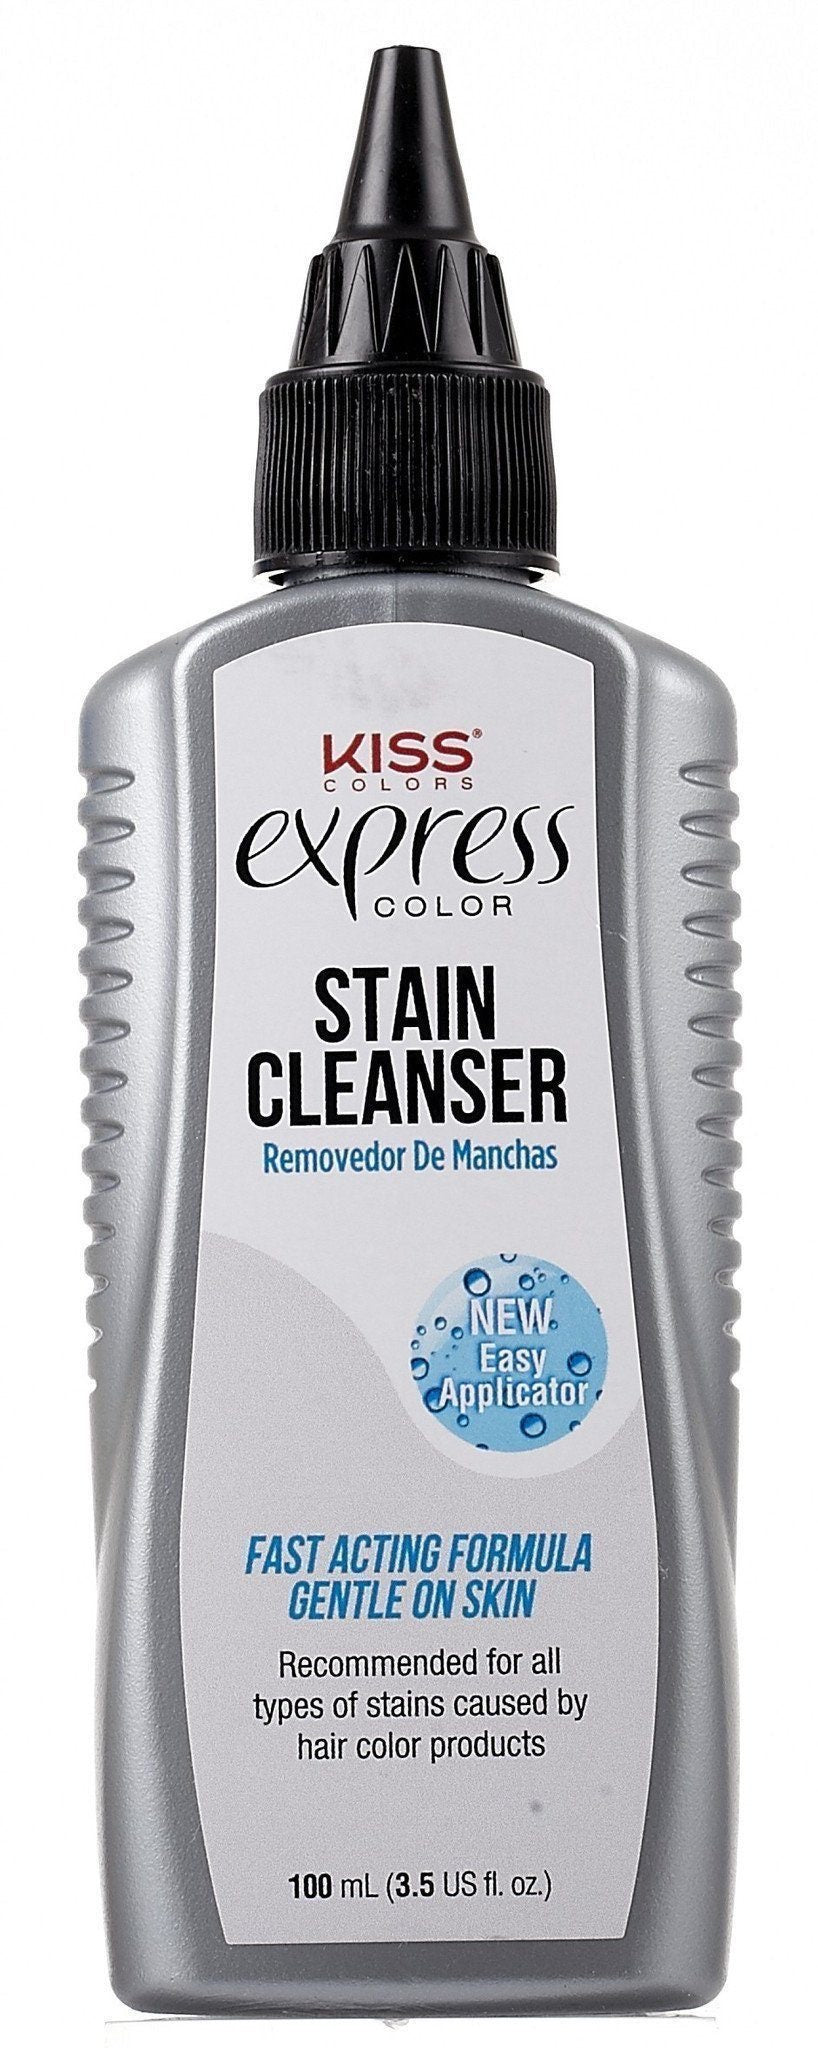 Kiss express stain cleanser 100ml